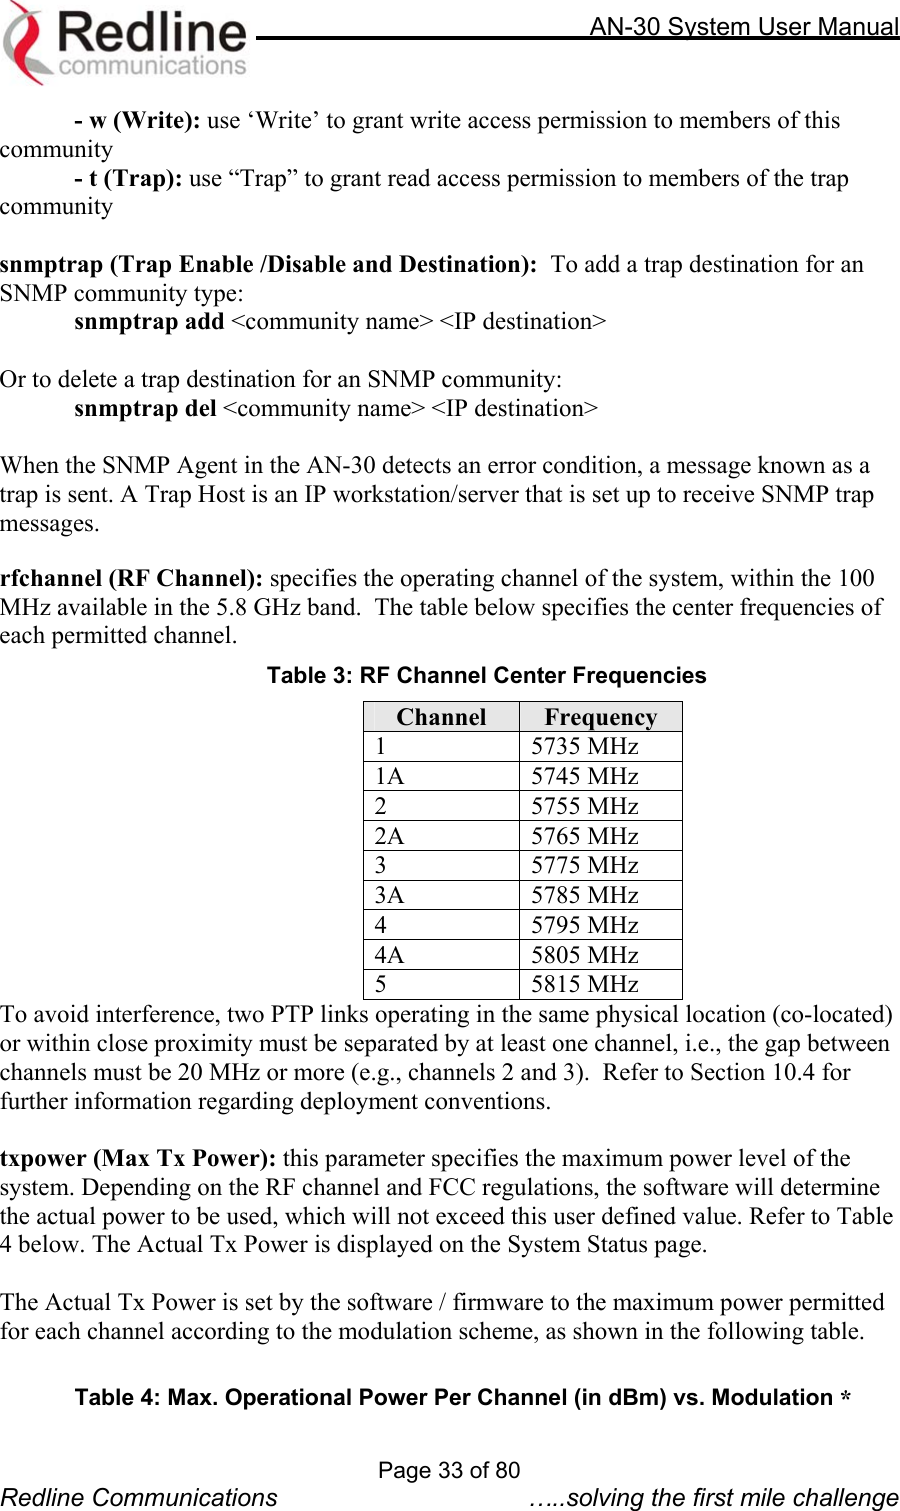     AN-30 System User Manual  - w (Write): use ‘Write’ to grant write access permission to members of this community - t (Trap): use “Trap” to grant read access permission to members of the trap community  snmptrap (Trap Enable /Disable and Destination):  To add a trap destination for an SNMP community type: snmptrap add &lt;community name&gt; &lt;IP destination&gt;  Or to delete a trap destination for an SNMP community: snmptrap del &lt;community name&gt; &lt;IP destination&gt;  When the SNMP Agent in the AN-30 detects an error condition, a message known as a trap is sent. A Trap Host is an IP workstation/server that is set up to receive SNMP trap messages.  rfchannel (RF Channel): specifies the operating channel of the system, within the 100 MHz available in the 5.8 GHz band.  The table below specifies the center frequencies of each permitted channel. Table 3: RF Channel Center Frequencies Channel  Frequency 1 5735 MHz 1A 5745 MHz 2 5755 MHz 2A 5765 MHz 3 5775 MHz 3A 5785 MHz 4 5795 MHz 4A 5805 MHz 5 5815 MHz To avoid interference, two PTP links operating in the same physical location (co-located) or within close proximity must be separated by at least one channel, i.e., the gap between channels must be 20 MHz or more (e.g., channels 2 and 3).  Refer to Section 10.4 for further information regarding deployment conventions.    txpower (Max Tx Power): this parameter specifies the maximum power level of the system. Depending on the RF channel and FCC regulations, the software will determine the actual power to be used, which will not exceed this user defined value. Refer to Table 4 below. The Actual Tx Power is displayed on the System Status page.  The Actual Tx Power is set by the software / firmware to the maximum power permitted for each channel according to the modulation scheme, as shown in the following table.    Page 33 of 80 Redline Communications  …..solving the first mile challenge *Table 4: Max. Operational Power Per Channel (in dBm) vs. Modulation 